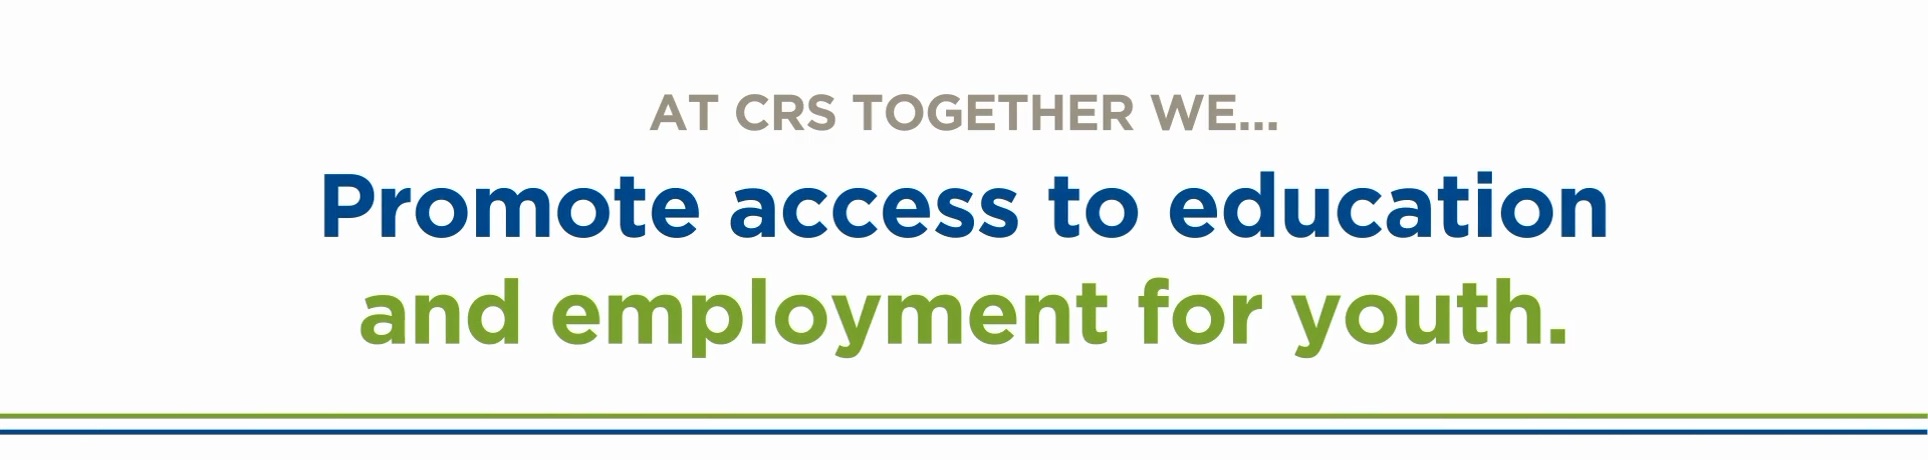 At CRS together we... promote access to education and employment for youth.